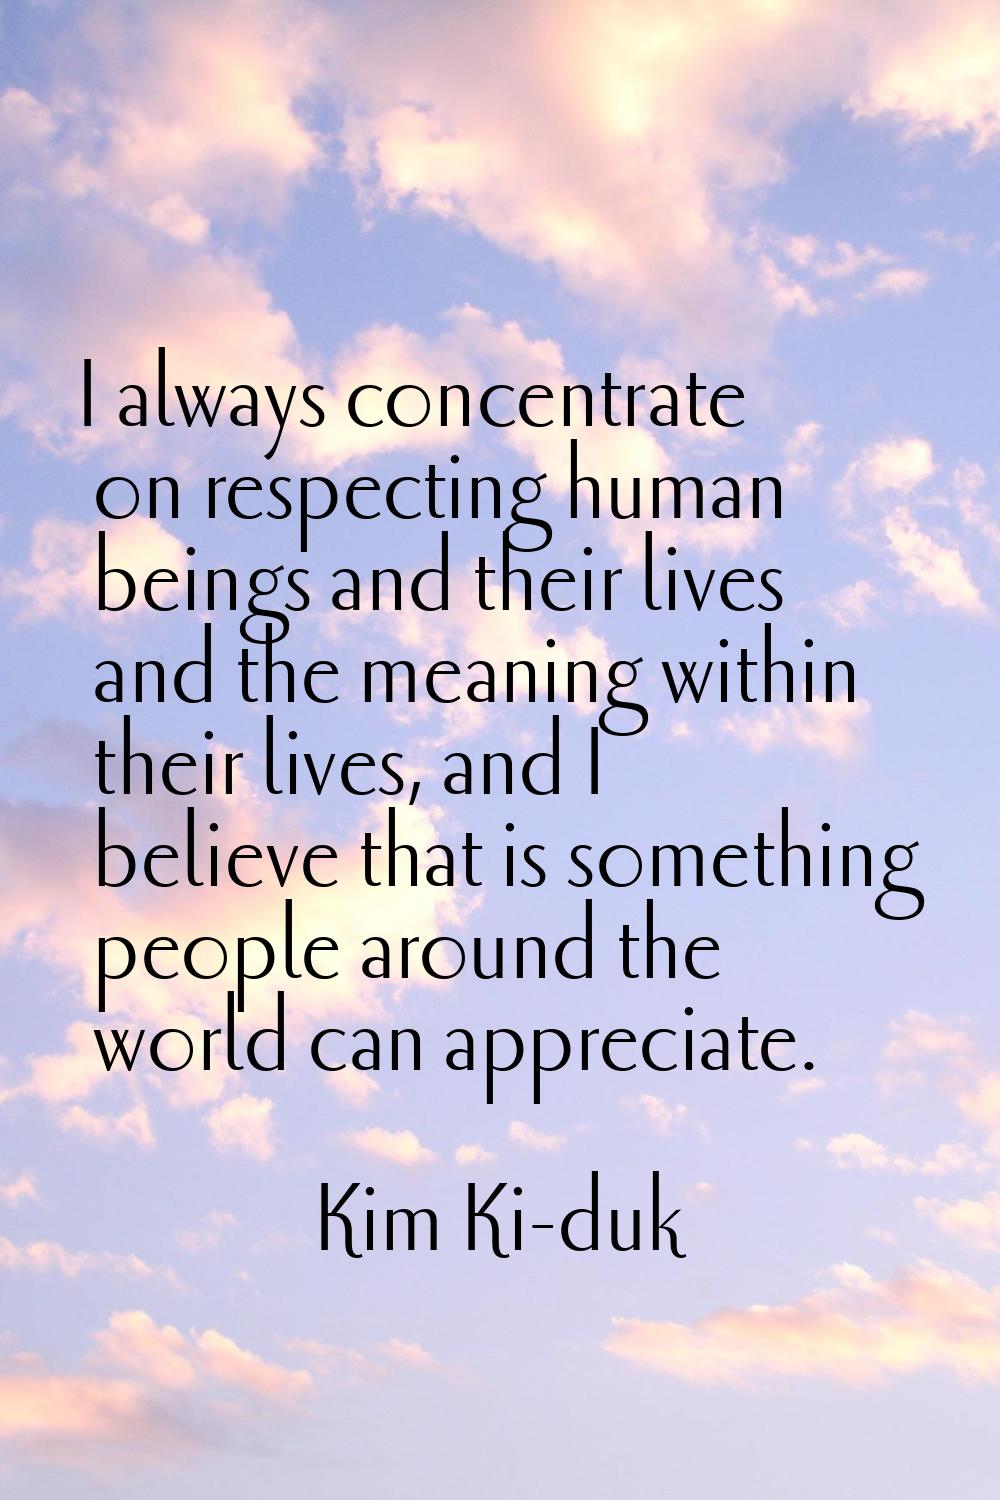 I always concentrate on respecting human beings and their lives and the meaning within their lives,